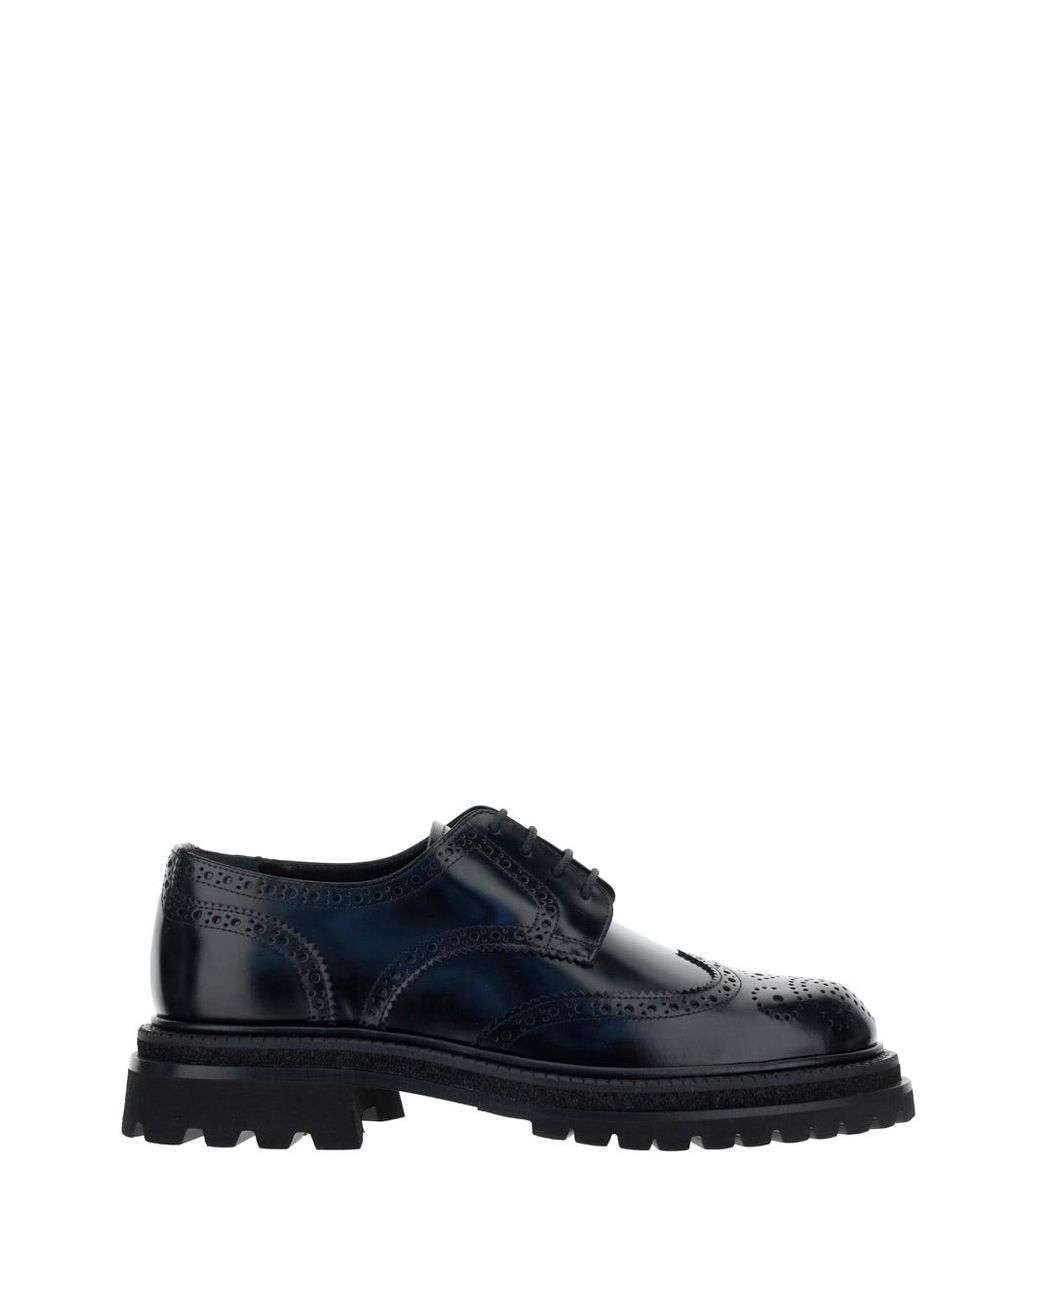 Fratelli Rossetti Lace-up Shoes in Black | Lyst